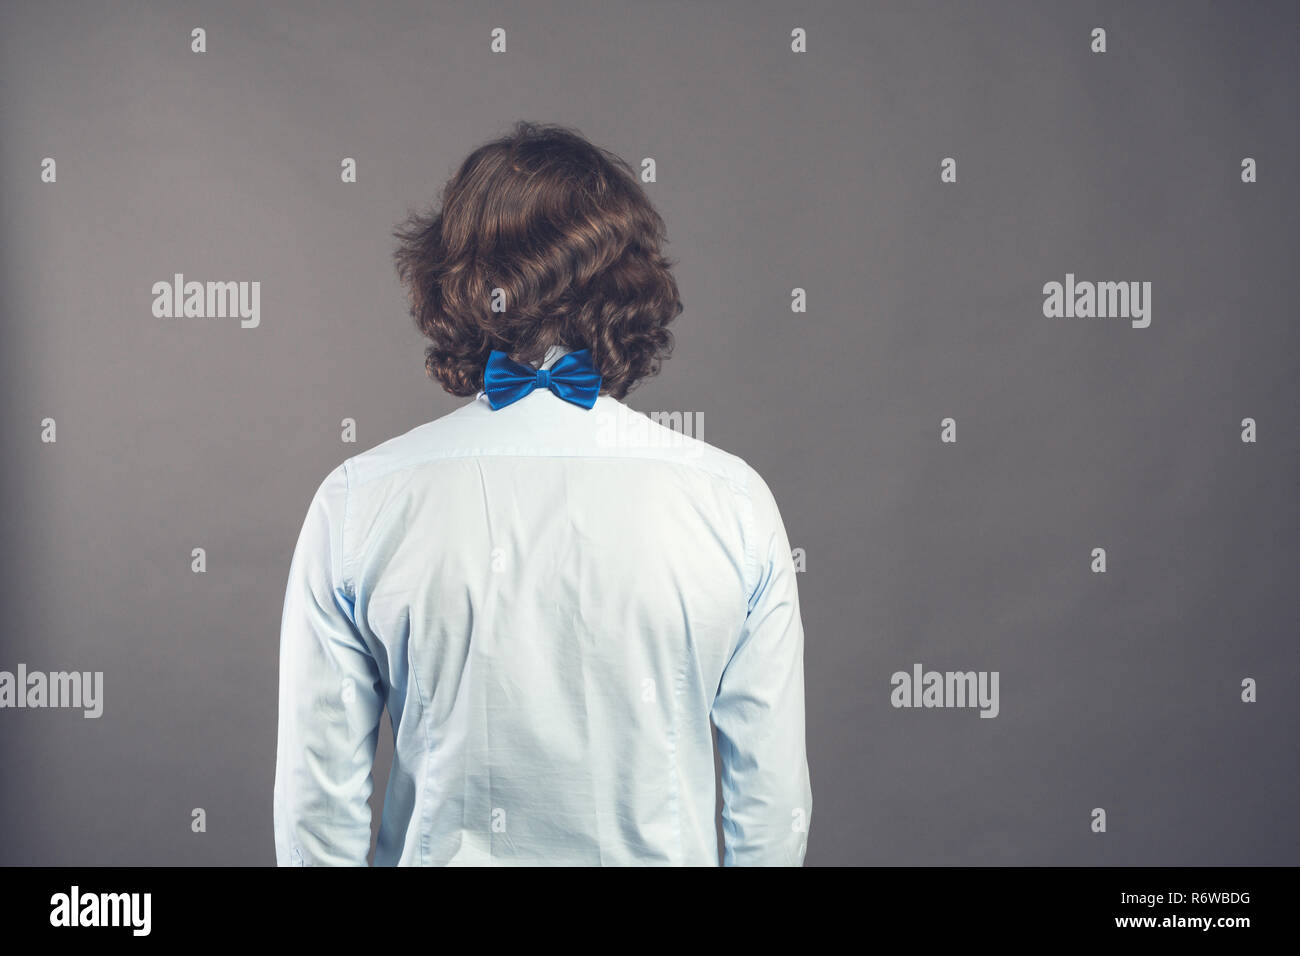 Back side view of a man with dark shaggy curly hair wearing blue shirt and bow tie against a grey background. Studio shot. Rear view people collection. Back view of person. Toned. Space for text. Stock Photo